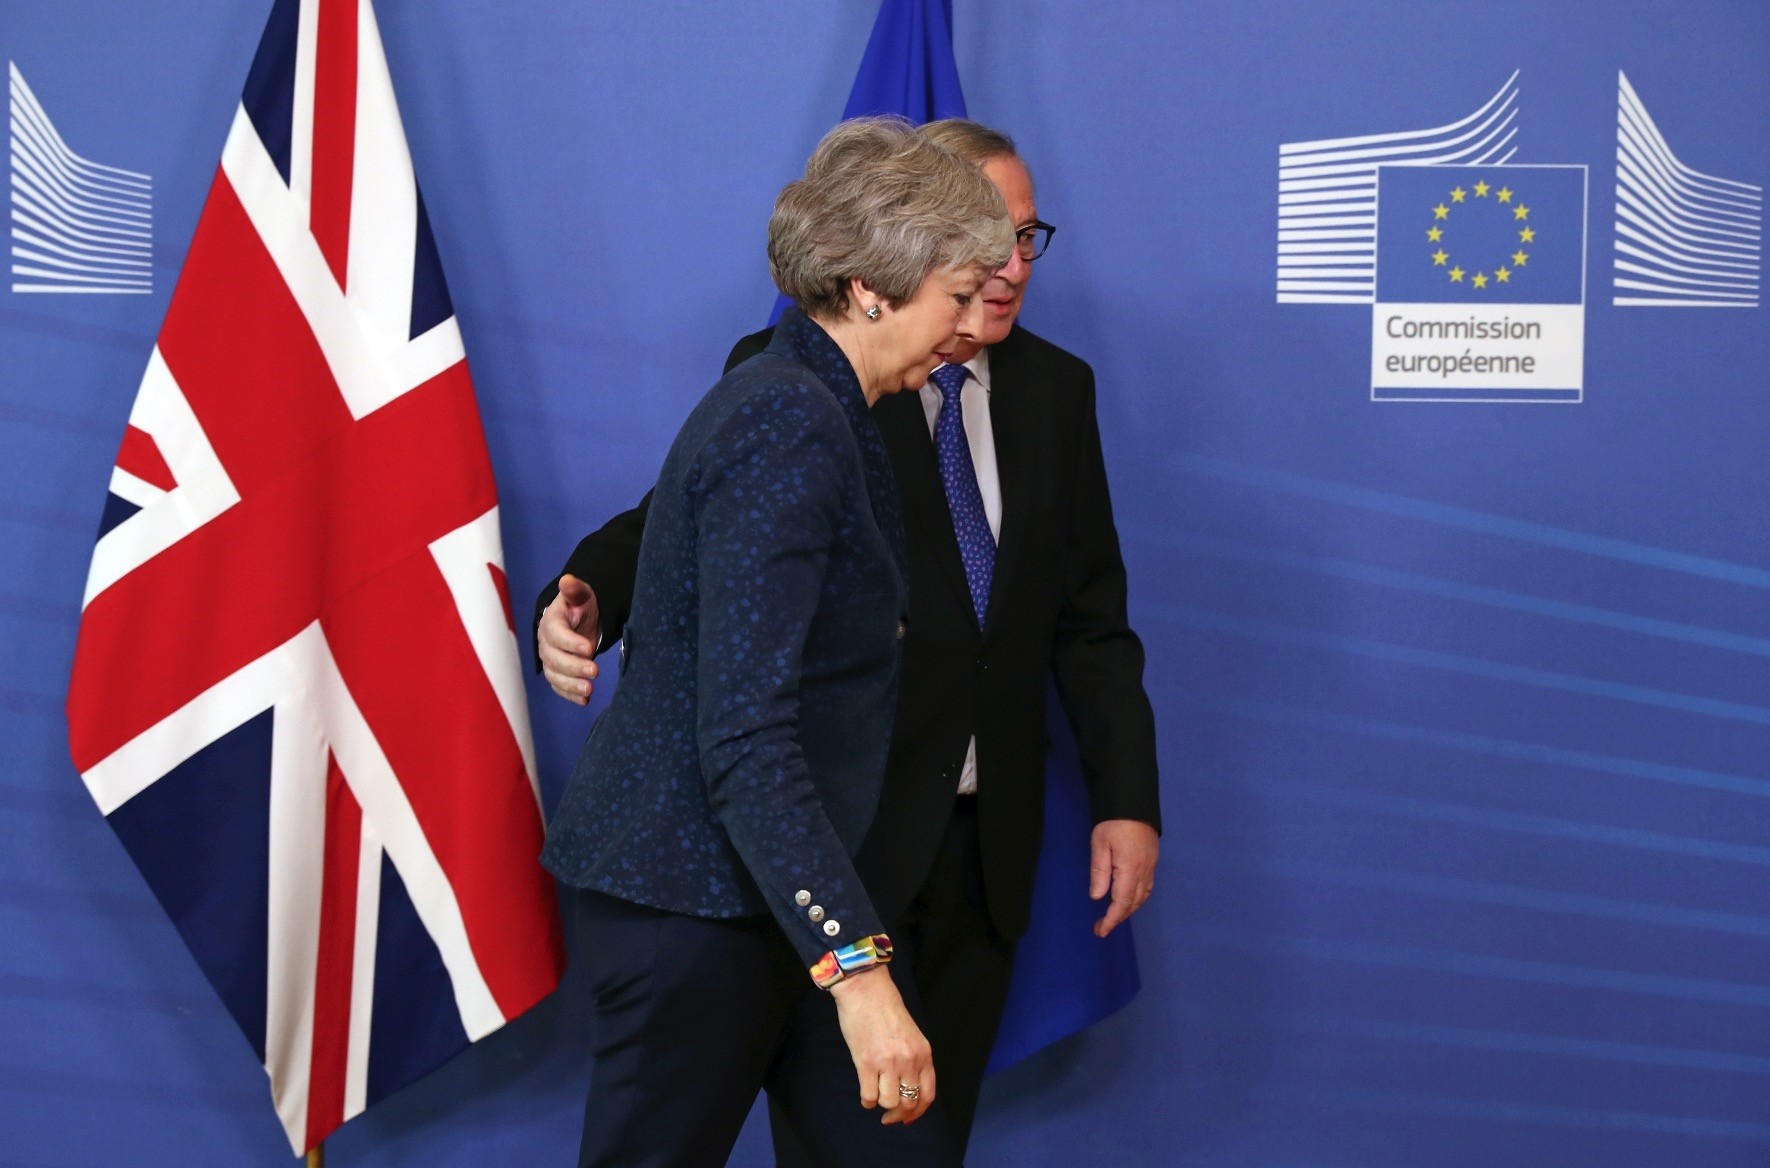 European Commission President Jean-Claude Juncker (L) arrives with British Prime Minister Theresa May before their meeting at the European Commission headquarters in Brussels, Thursday, Feb. 7, 2019. 